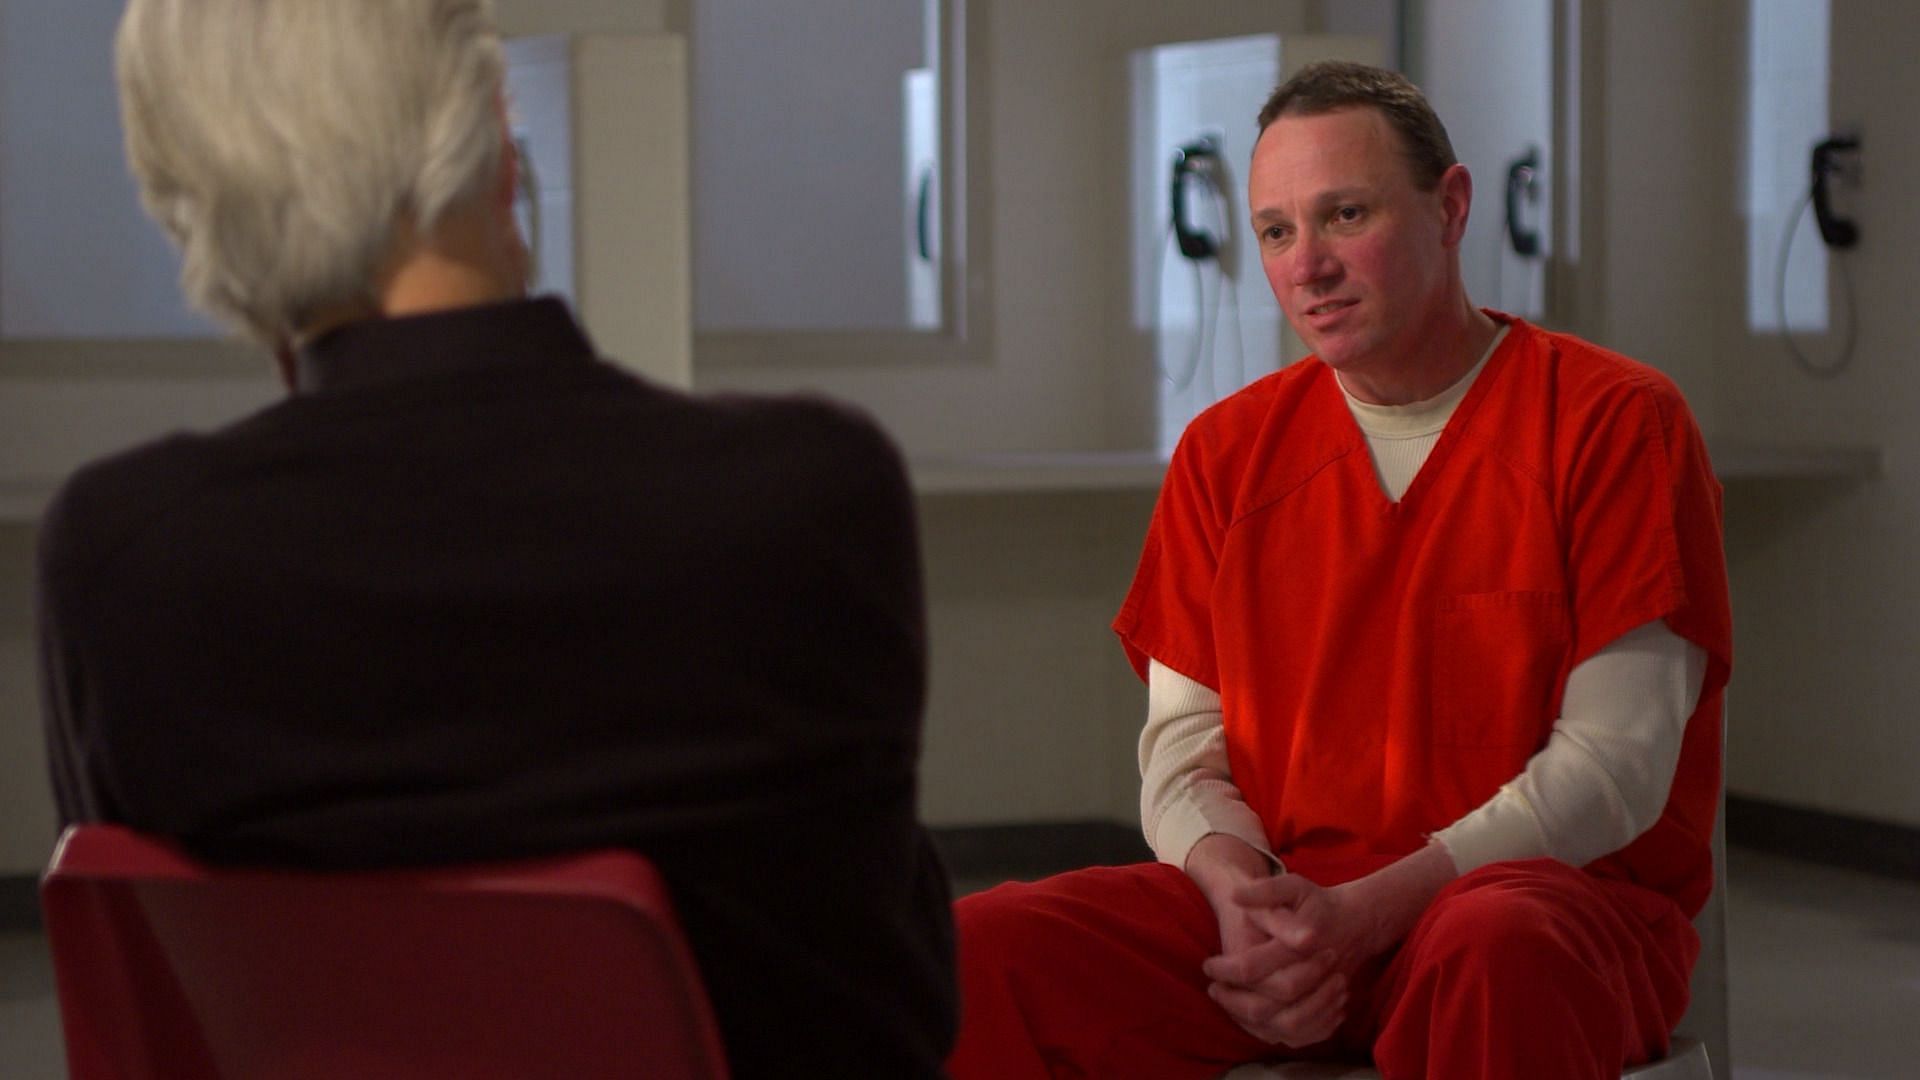 Marty Larson talks to Keith Morrison about being found guilty (Image via NBC)